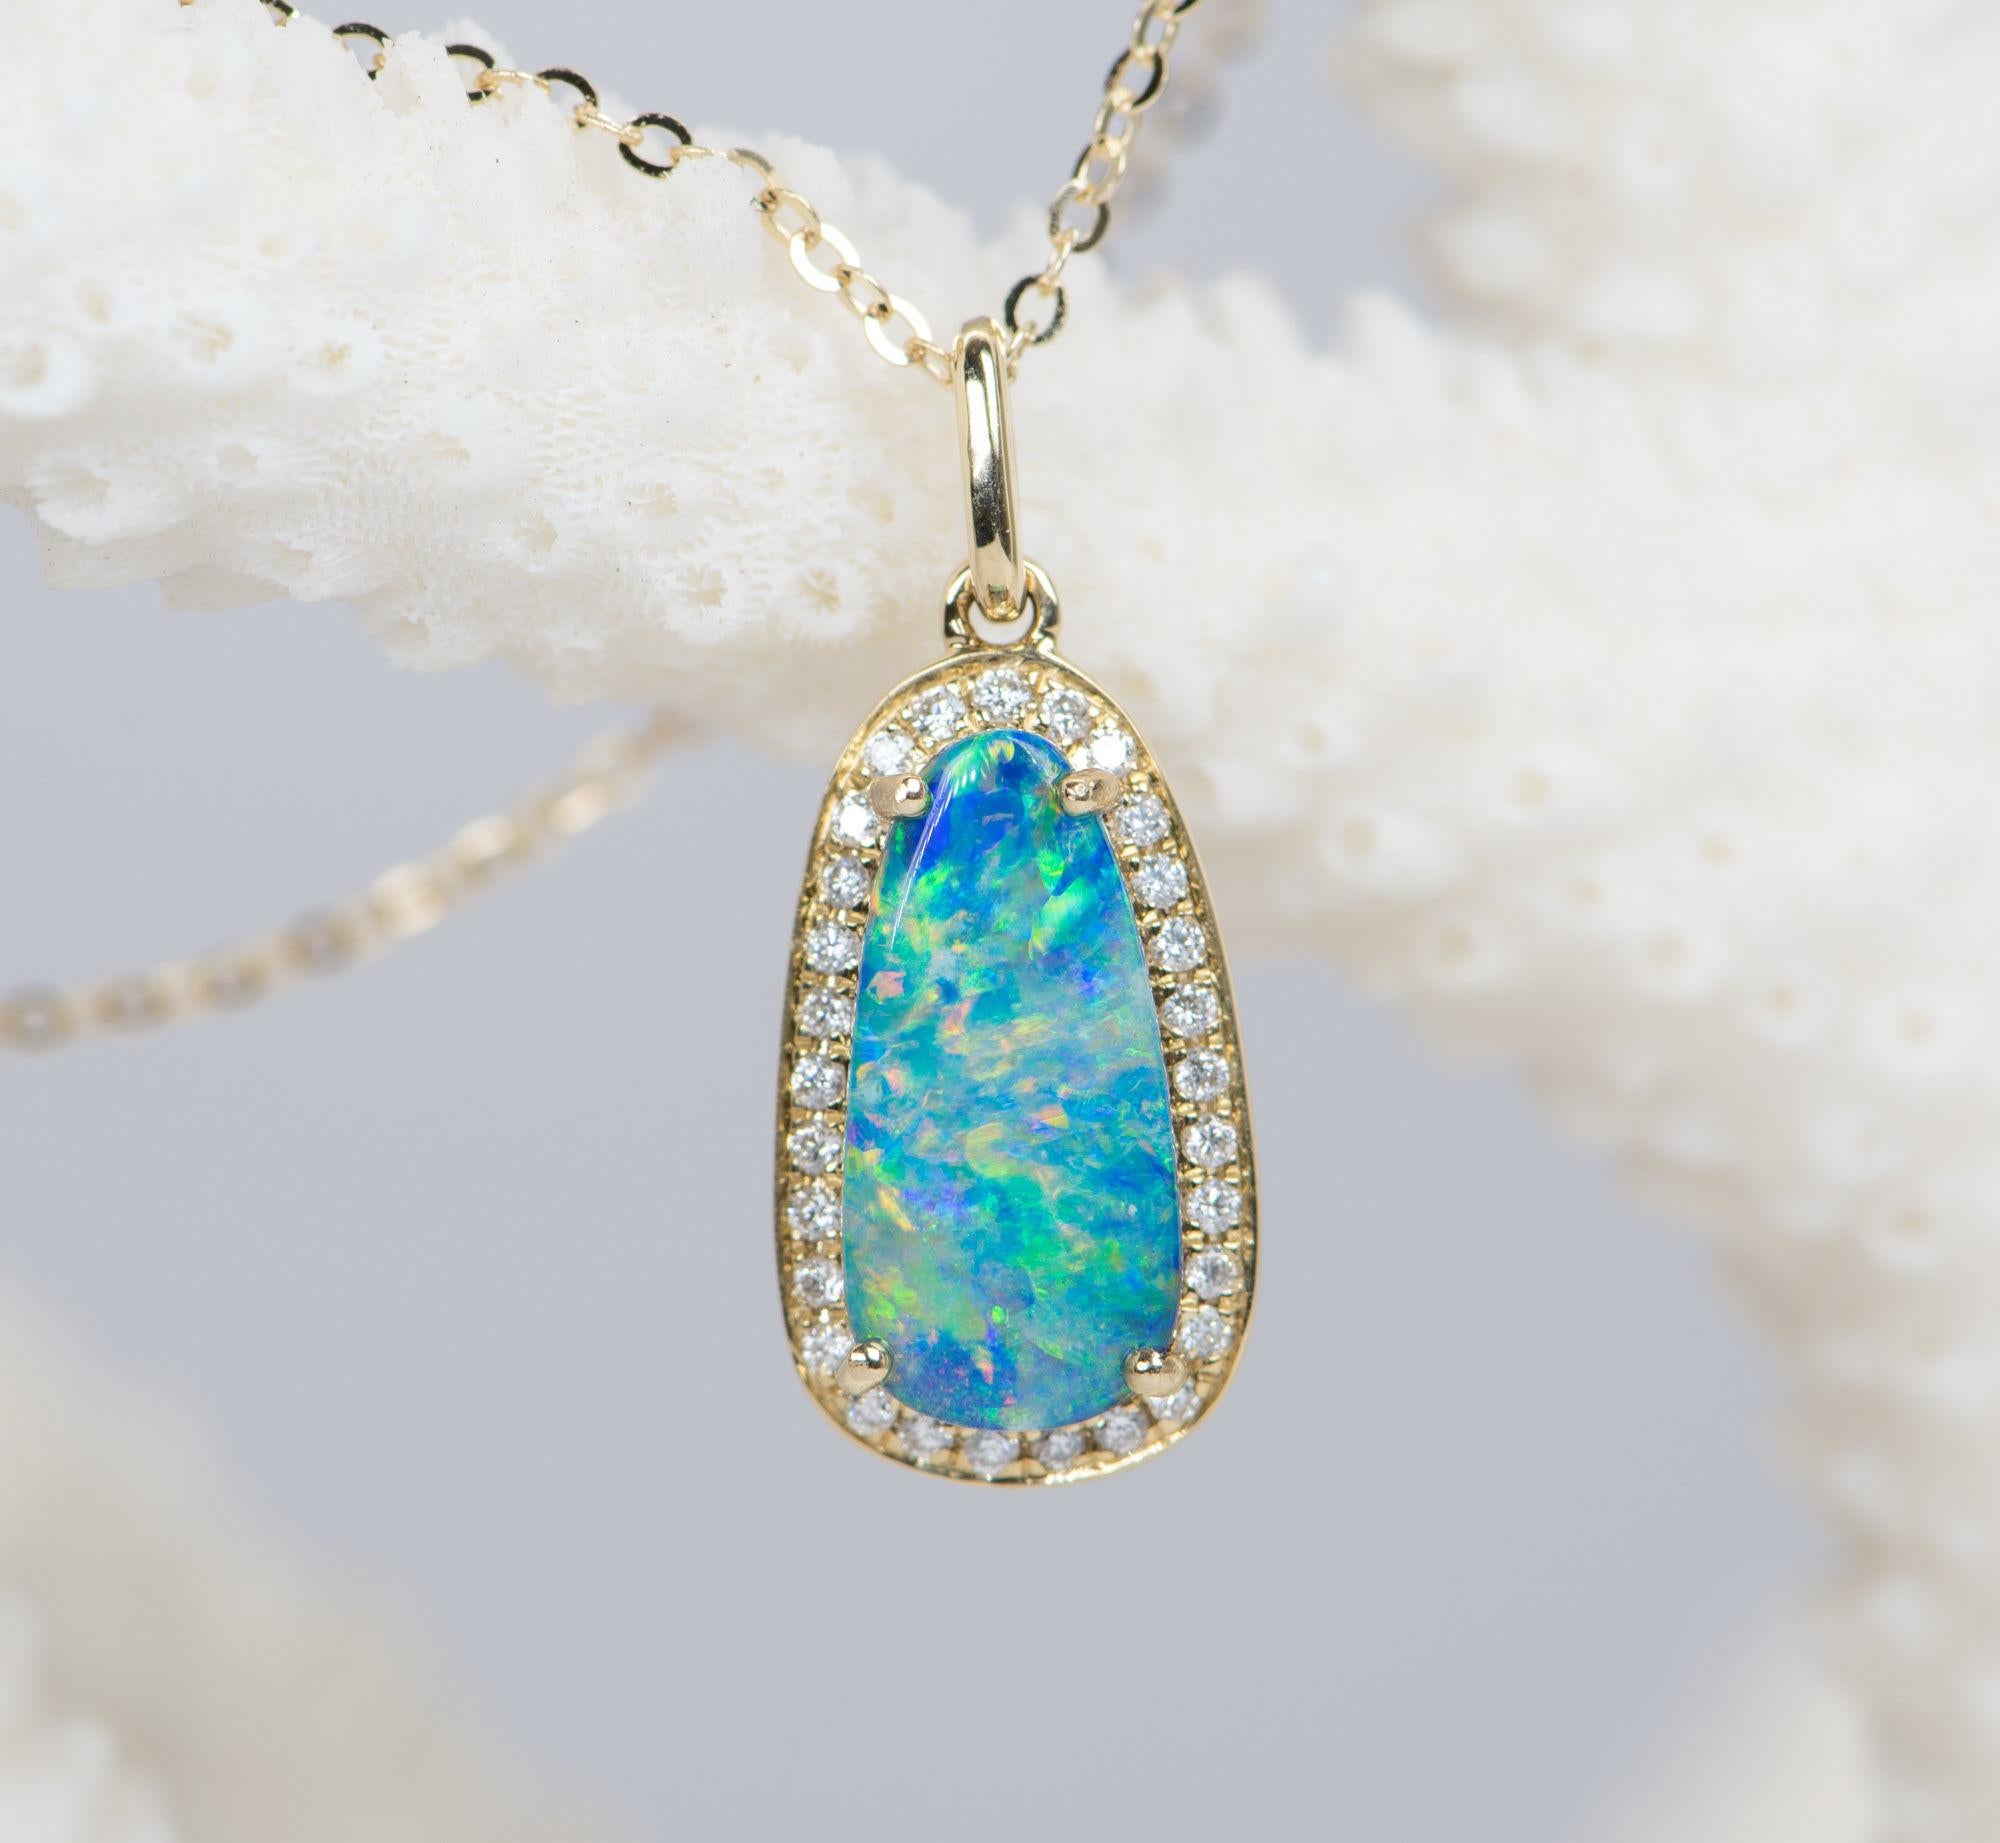 ♥ Spring Fire Australian Black Opal Doublet Diamond Halo 14K Yellow Gold Pendant
♥ Solid 14k yellow gold pendant set with a beautiful freeform-shaped Australian black opal doublet
♥ Gorgeous flash of fire!
♥ The item measures 15.1 mm in length, 8.9